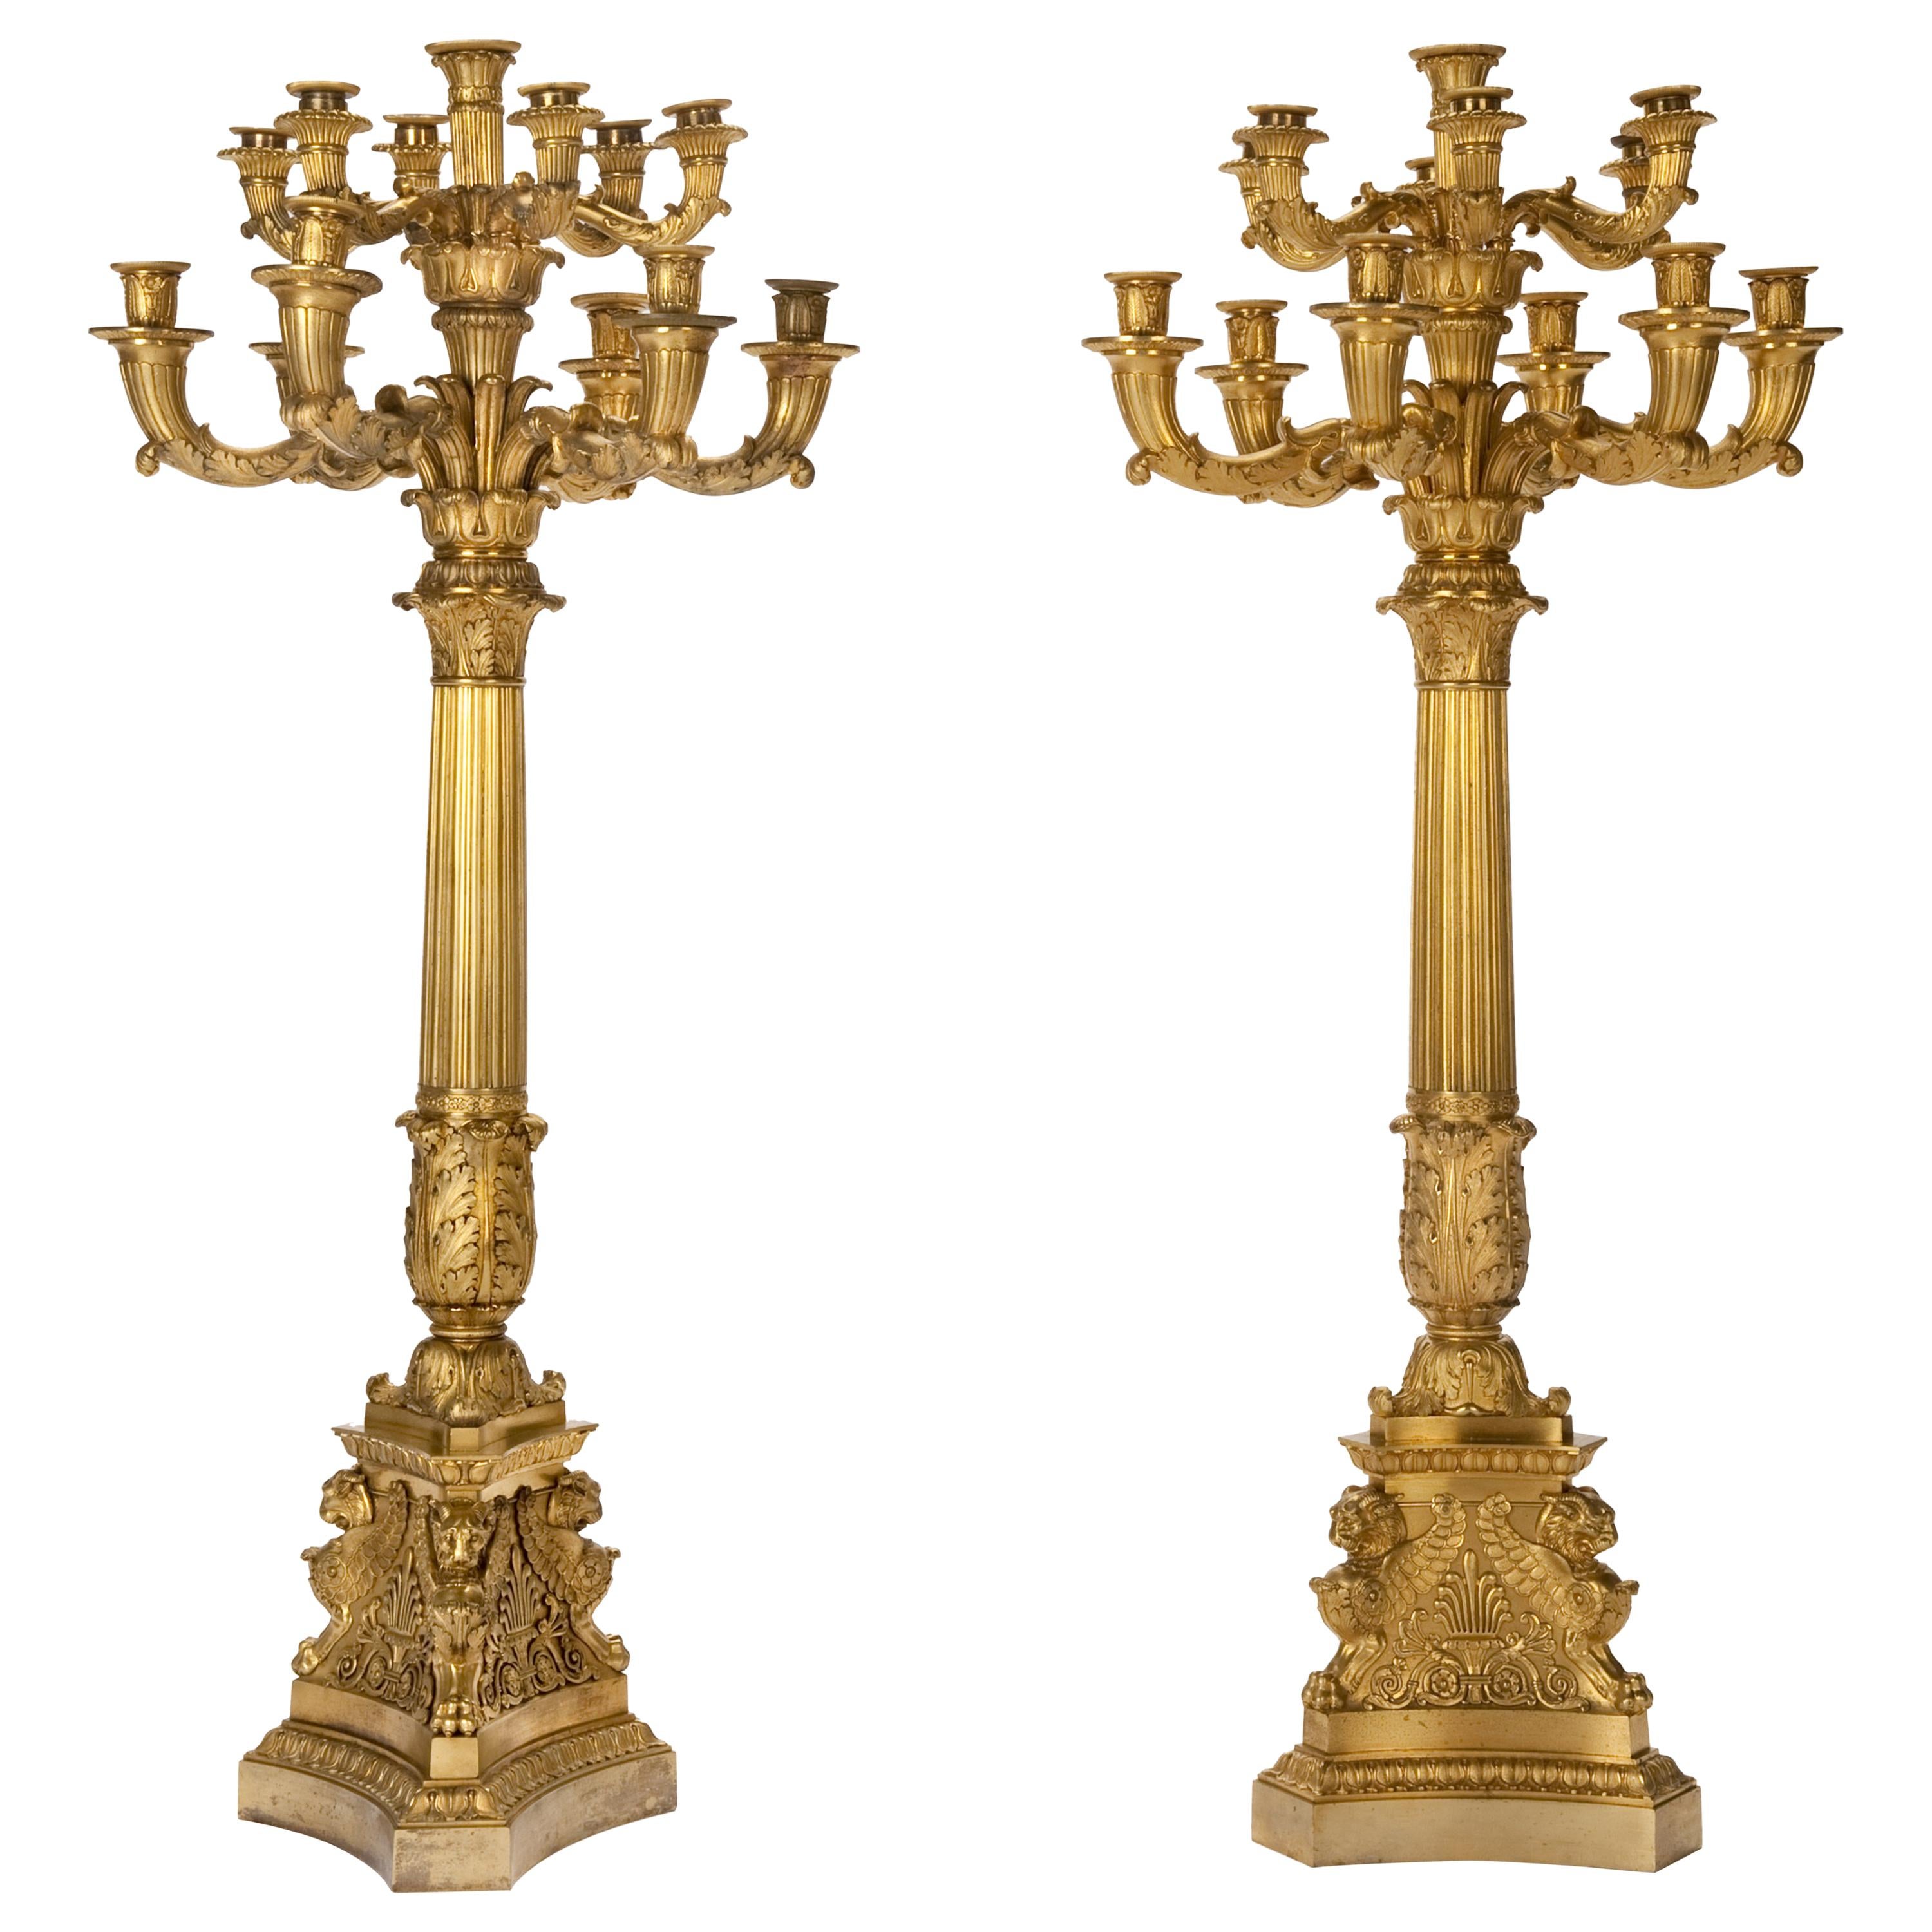 19th Century Pair of French or Russian Gilt Bronze Candelabra, circa 1830